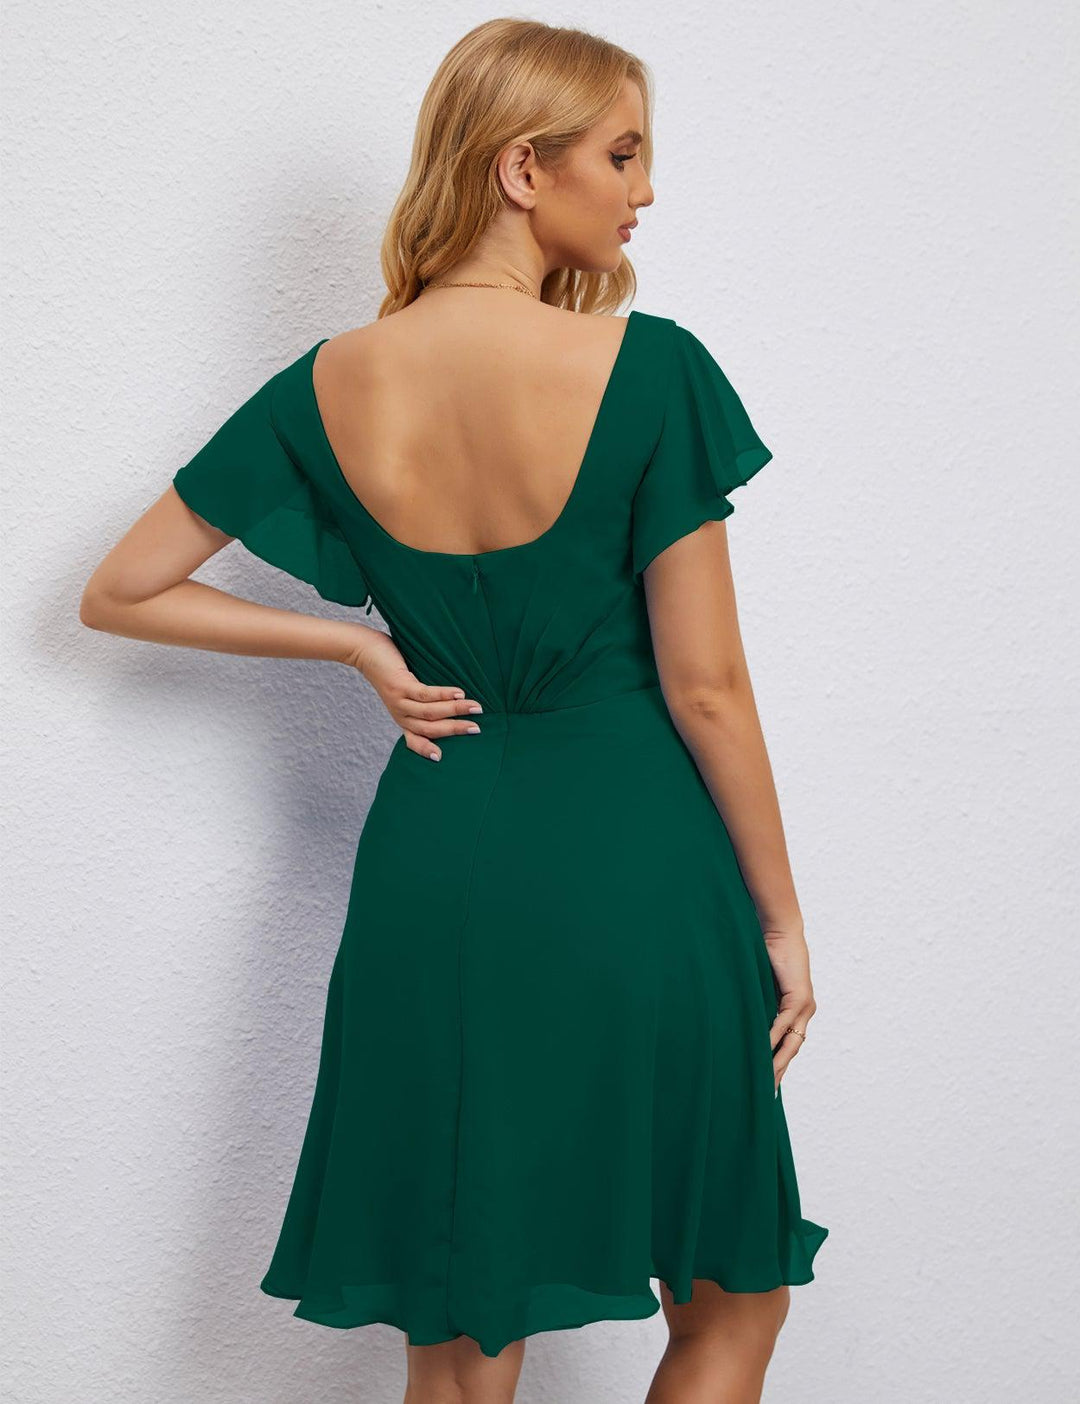 Numbersea Chiffon Bridesmaid Dress V Neck Short Cocktail Gowns for Juniors Homecoming Dresses 28077